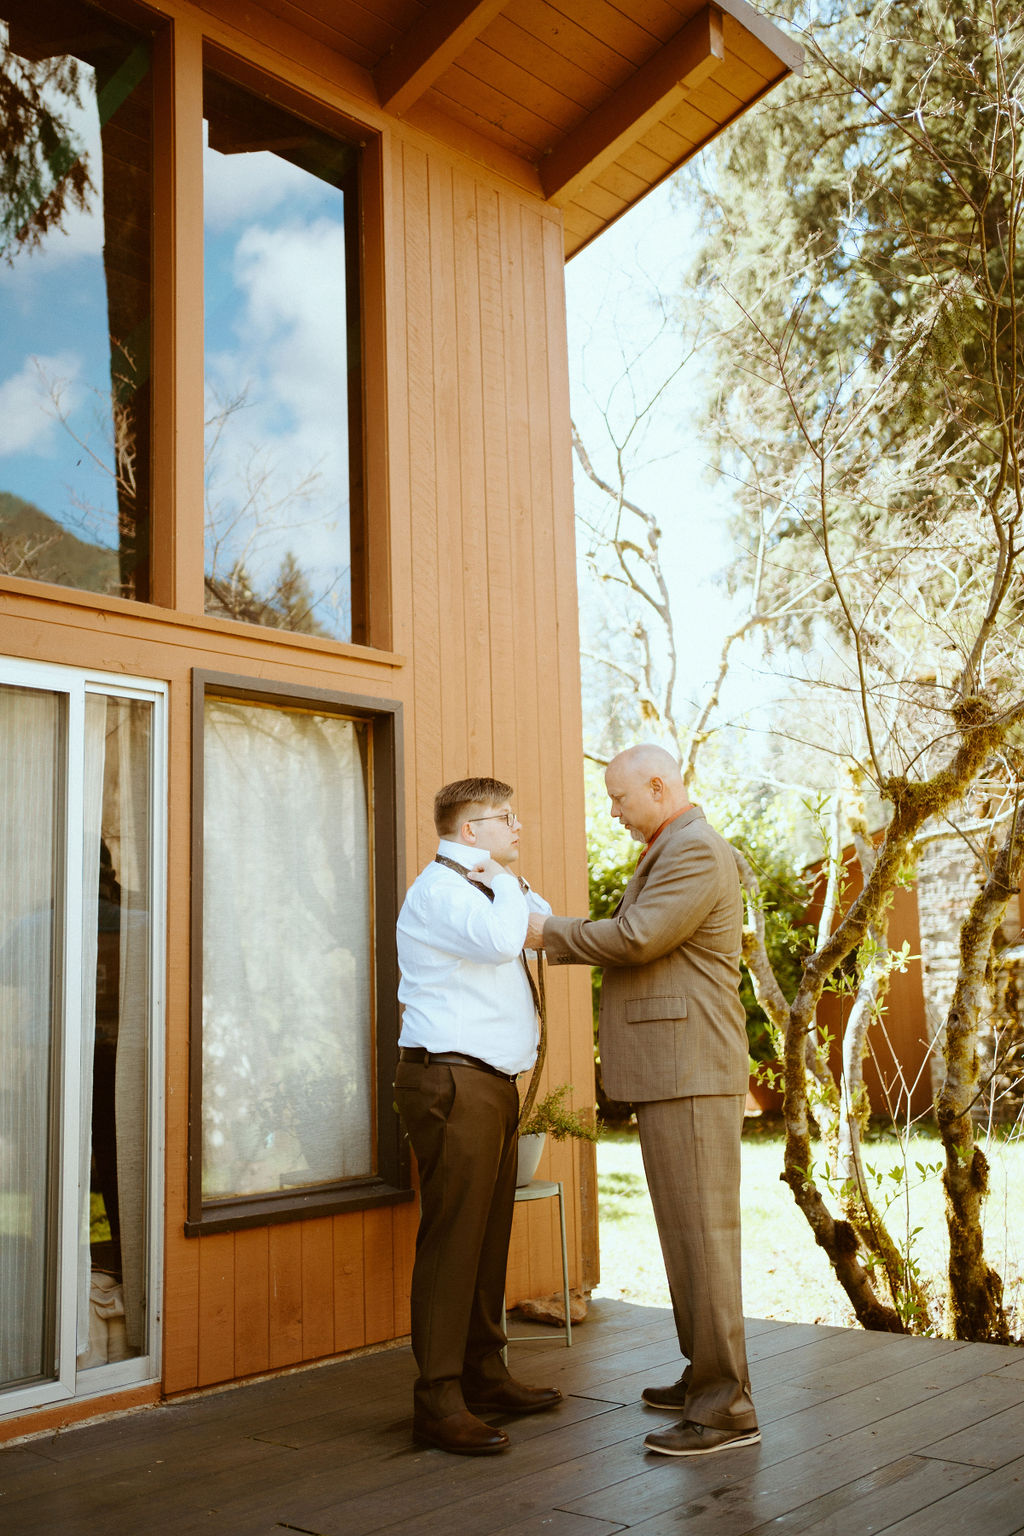 The grooms father is helping him get ready. Fixing his tie and sleeves of his button down shirt. Outside of the room on the balcony over looking the forest at Loloma Lodge.